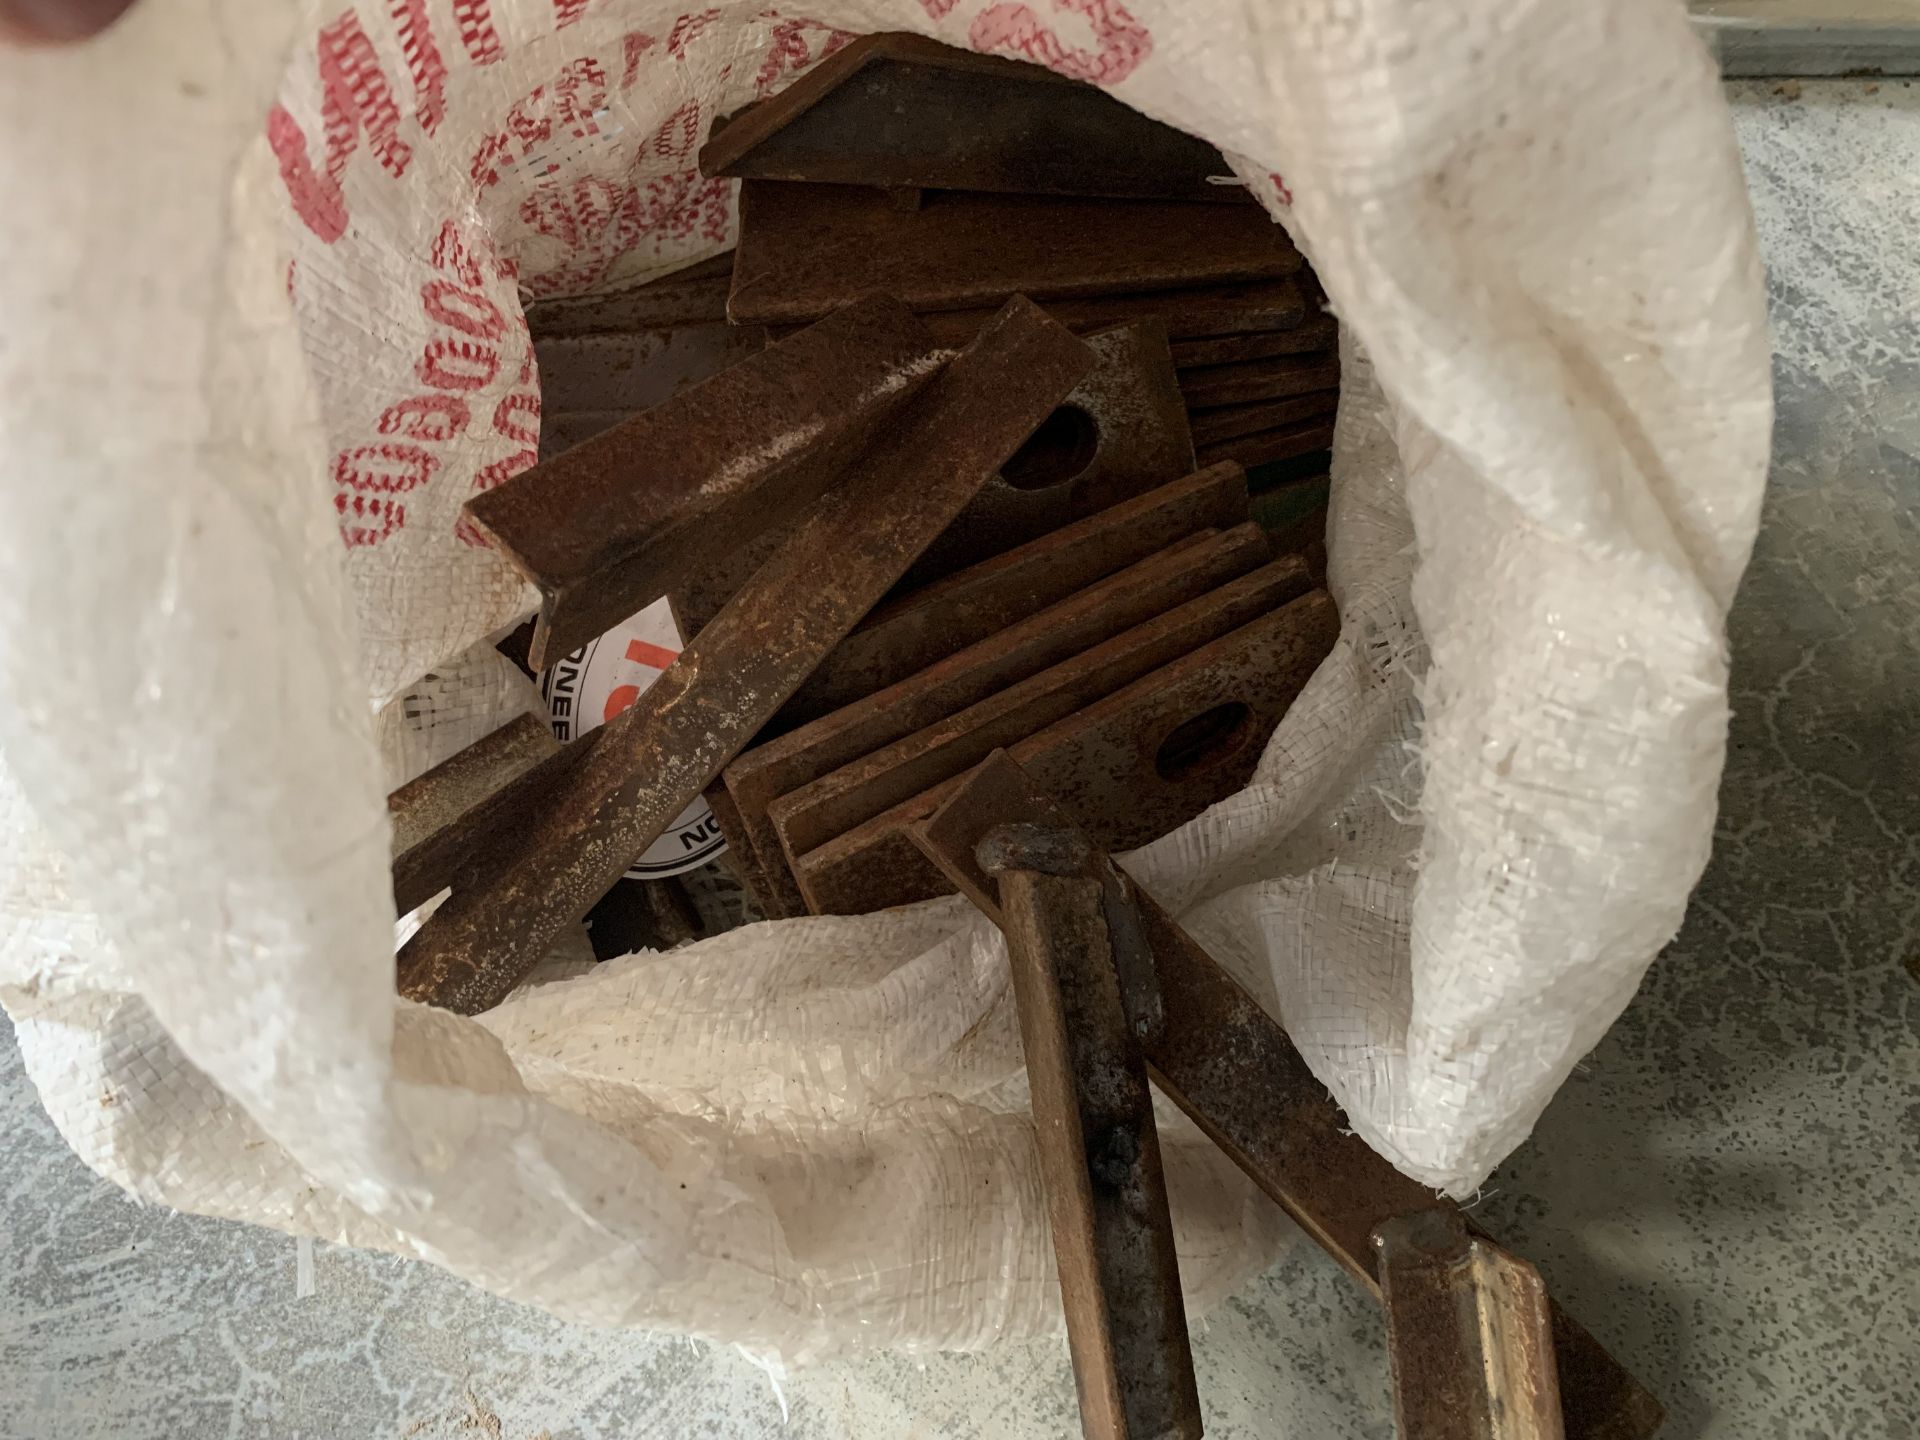 2 bags of jigs for weld on furrow splitters, Dowdeswell/Kverneland